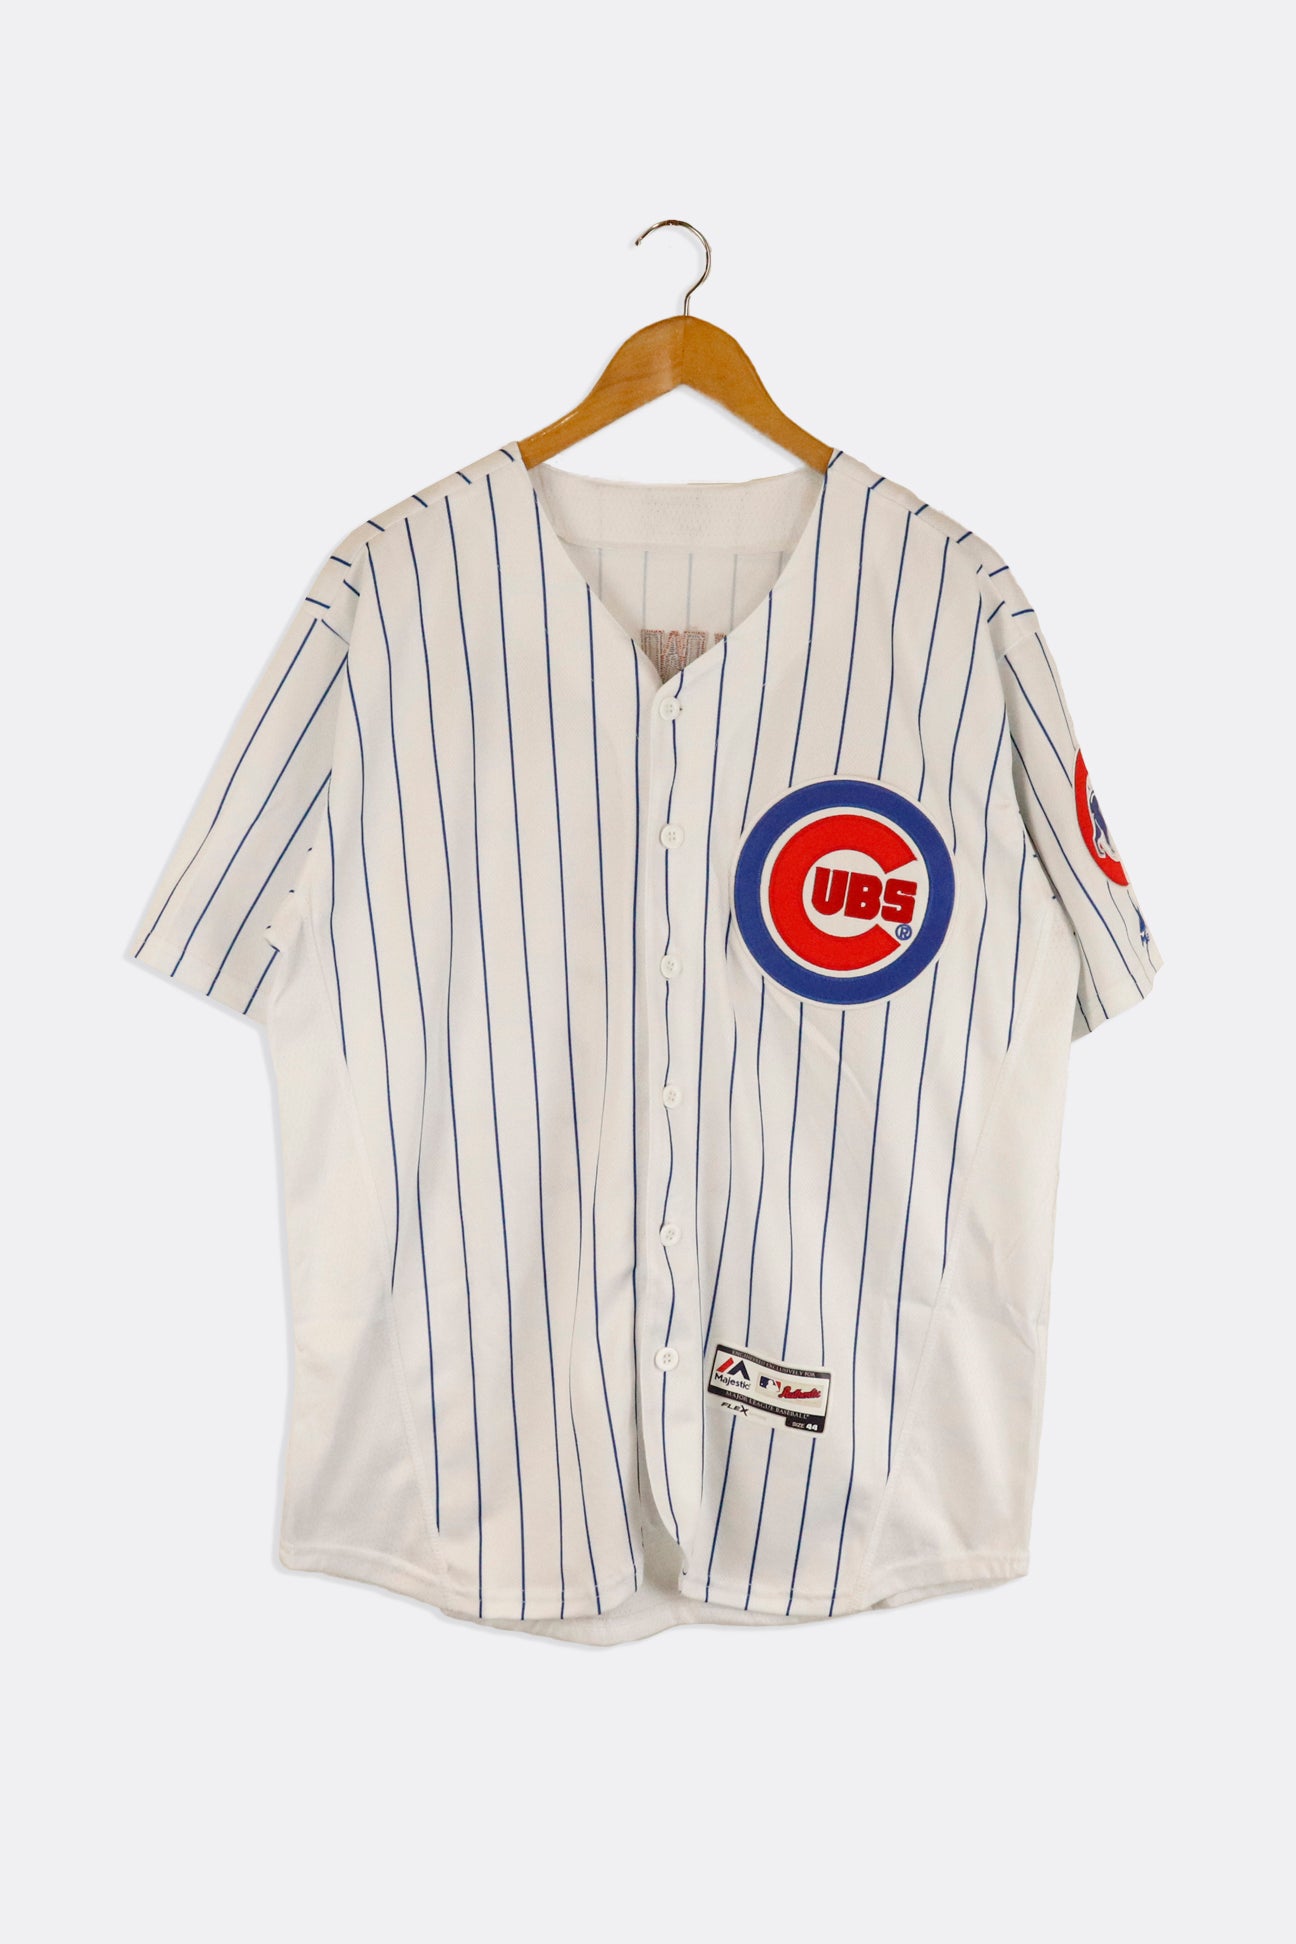 MLB Graphics and Jersey Swaps on Behance  Chicago cubs, Chicago cubs  baseball, Cubs